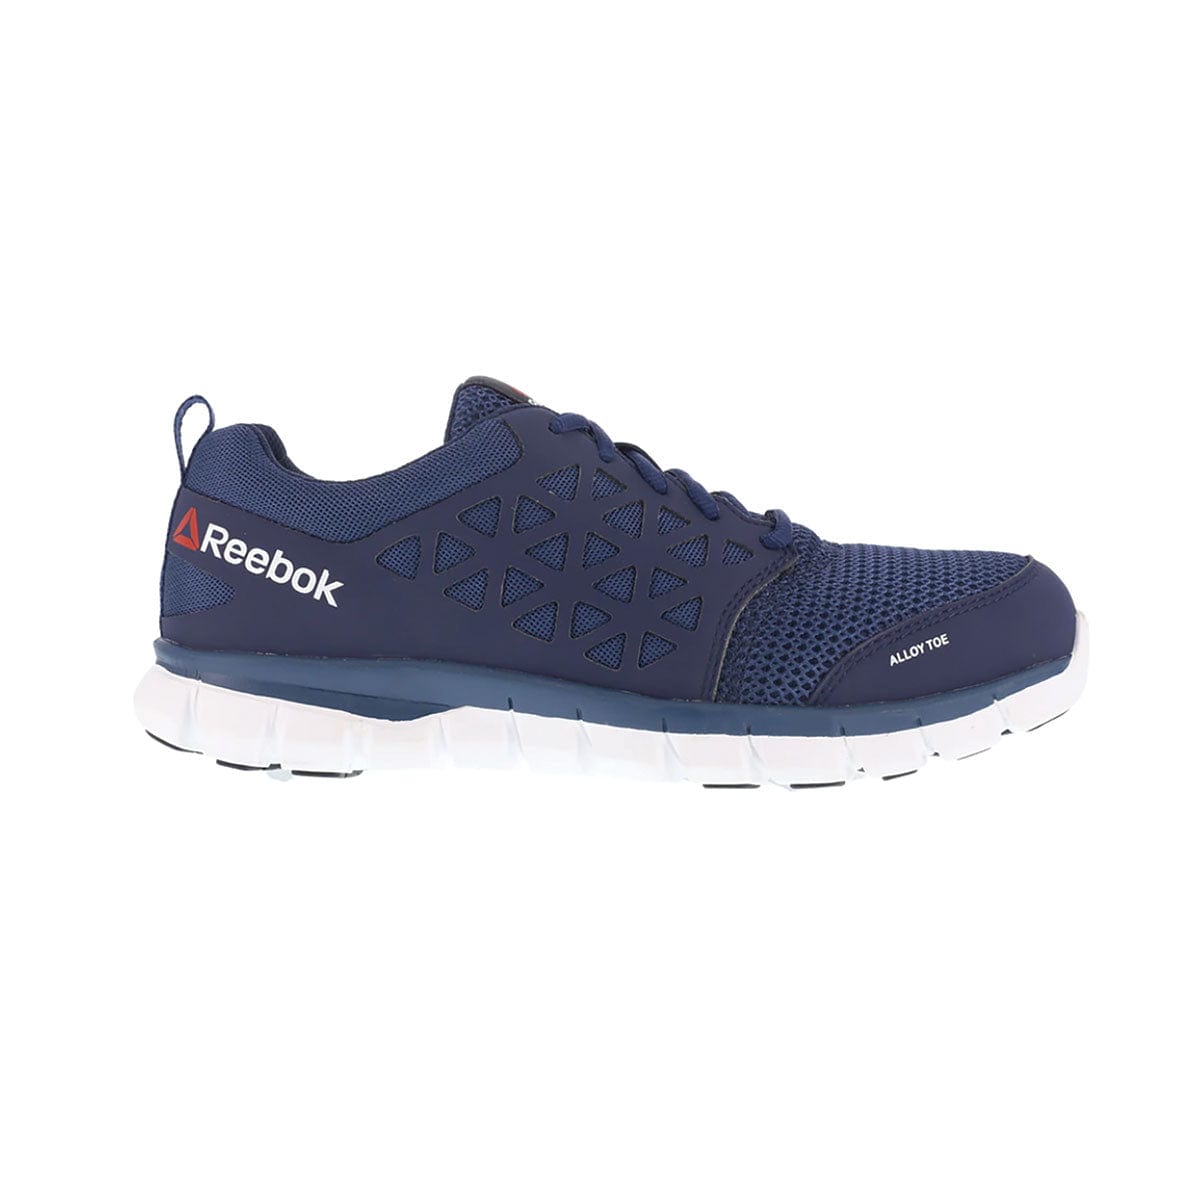 Reebok RB4043 Sublite Cushion SD10 Alloy Toe Athletic Work Shoes